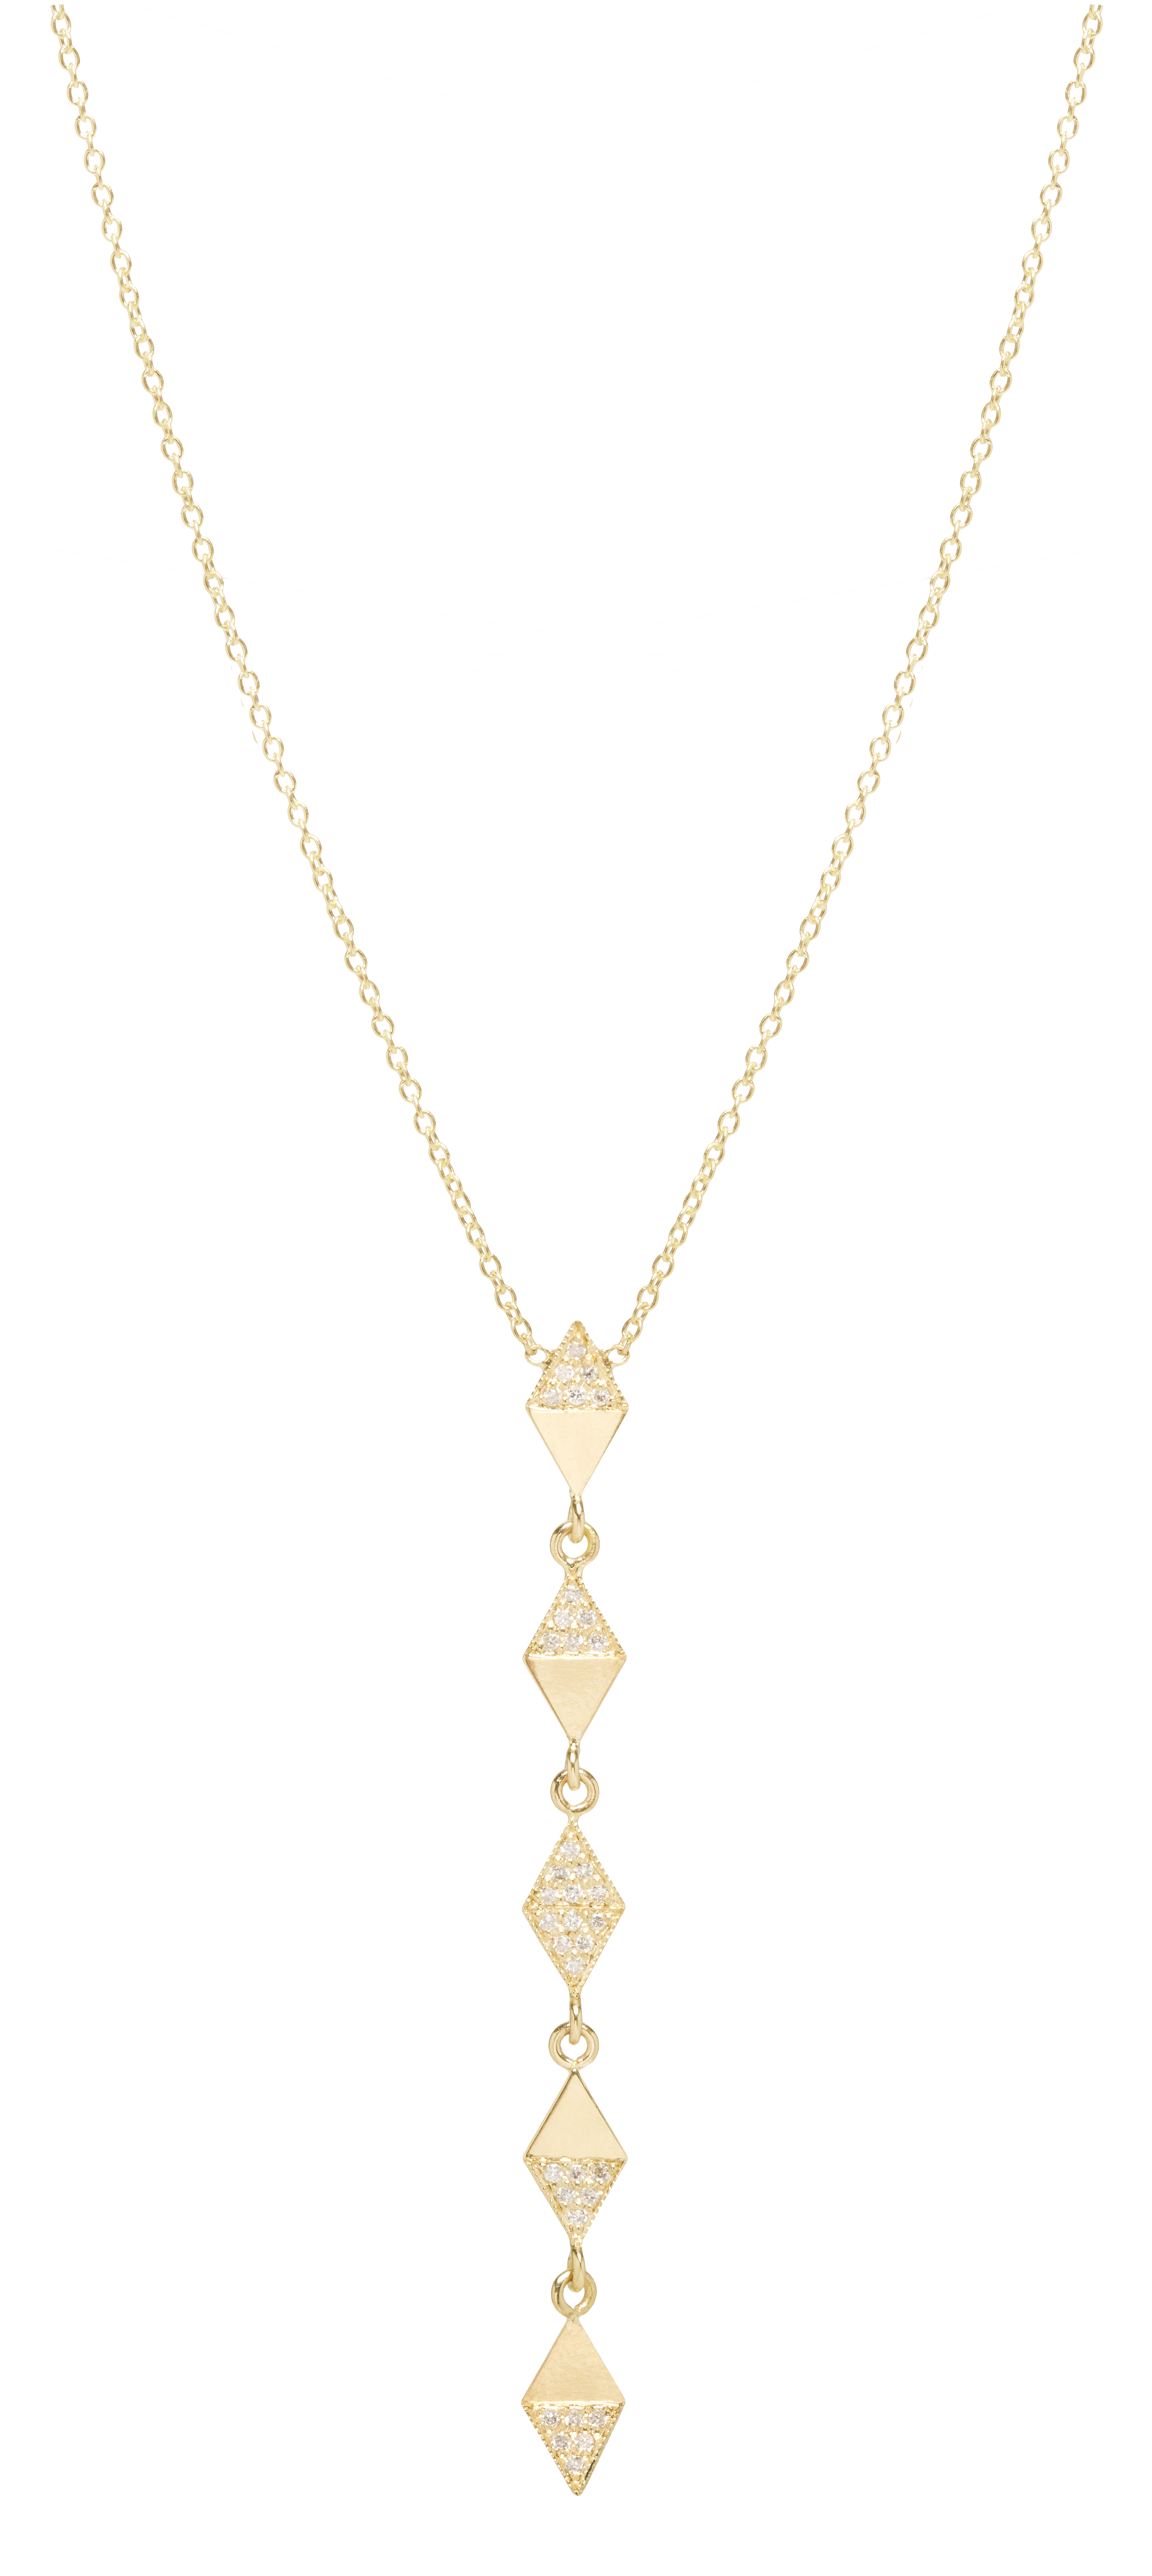 Zoe Chicco Harlequin diamond drop necklace | JCK On Your Market